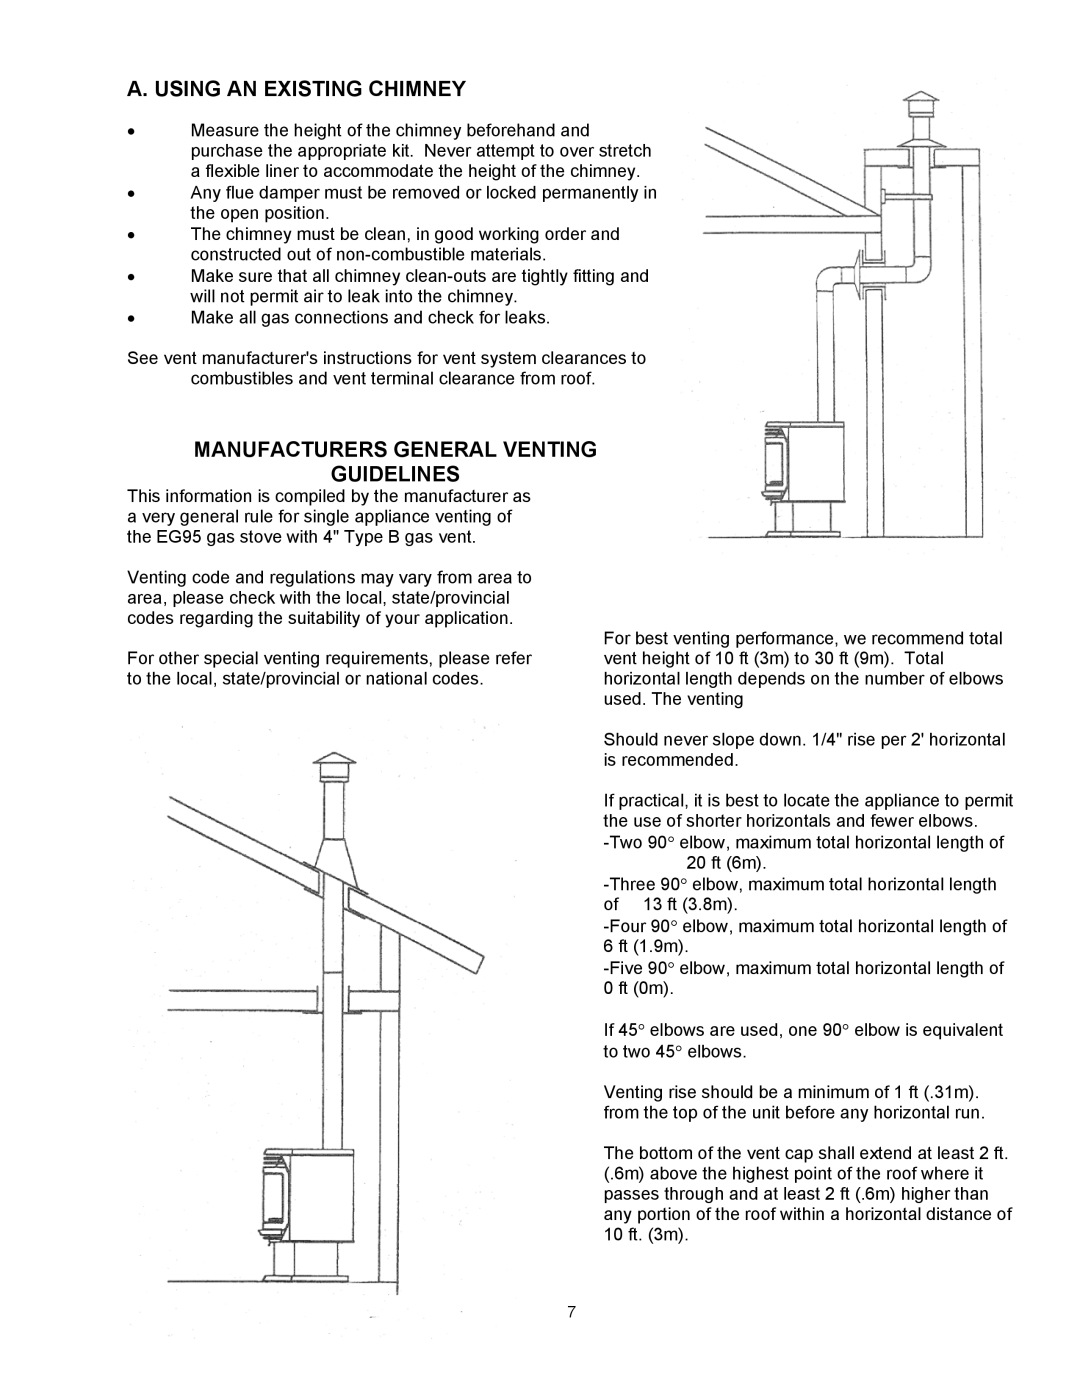 Enviro EG 40 B owner manual Using AN Existing Chimney, Manufacturers General Venting Guidelines 